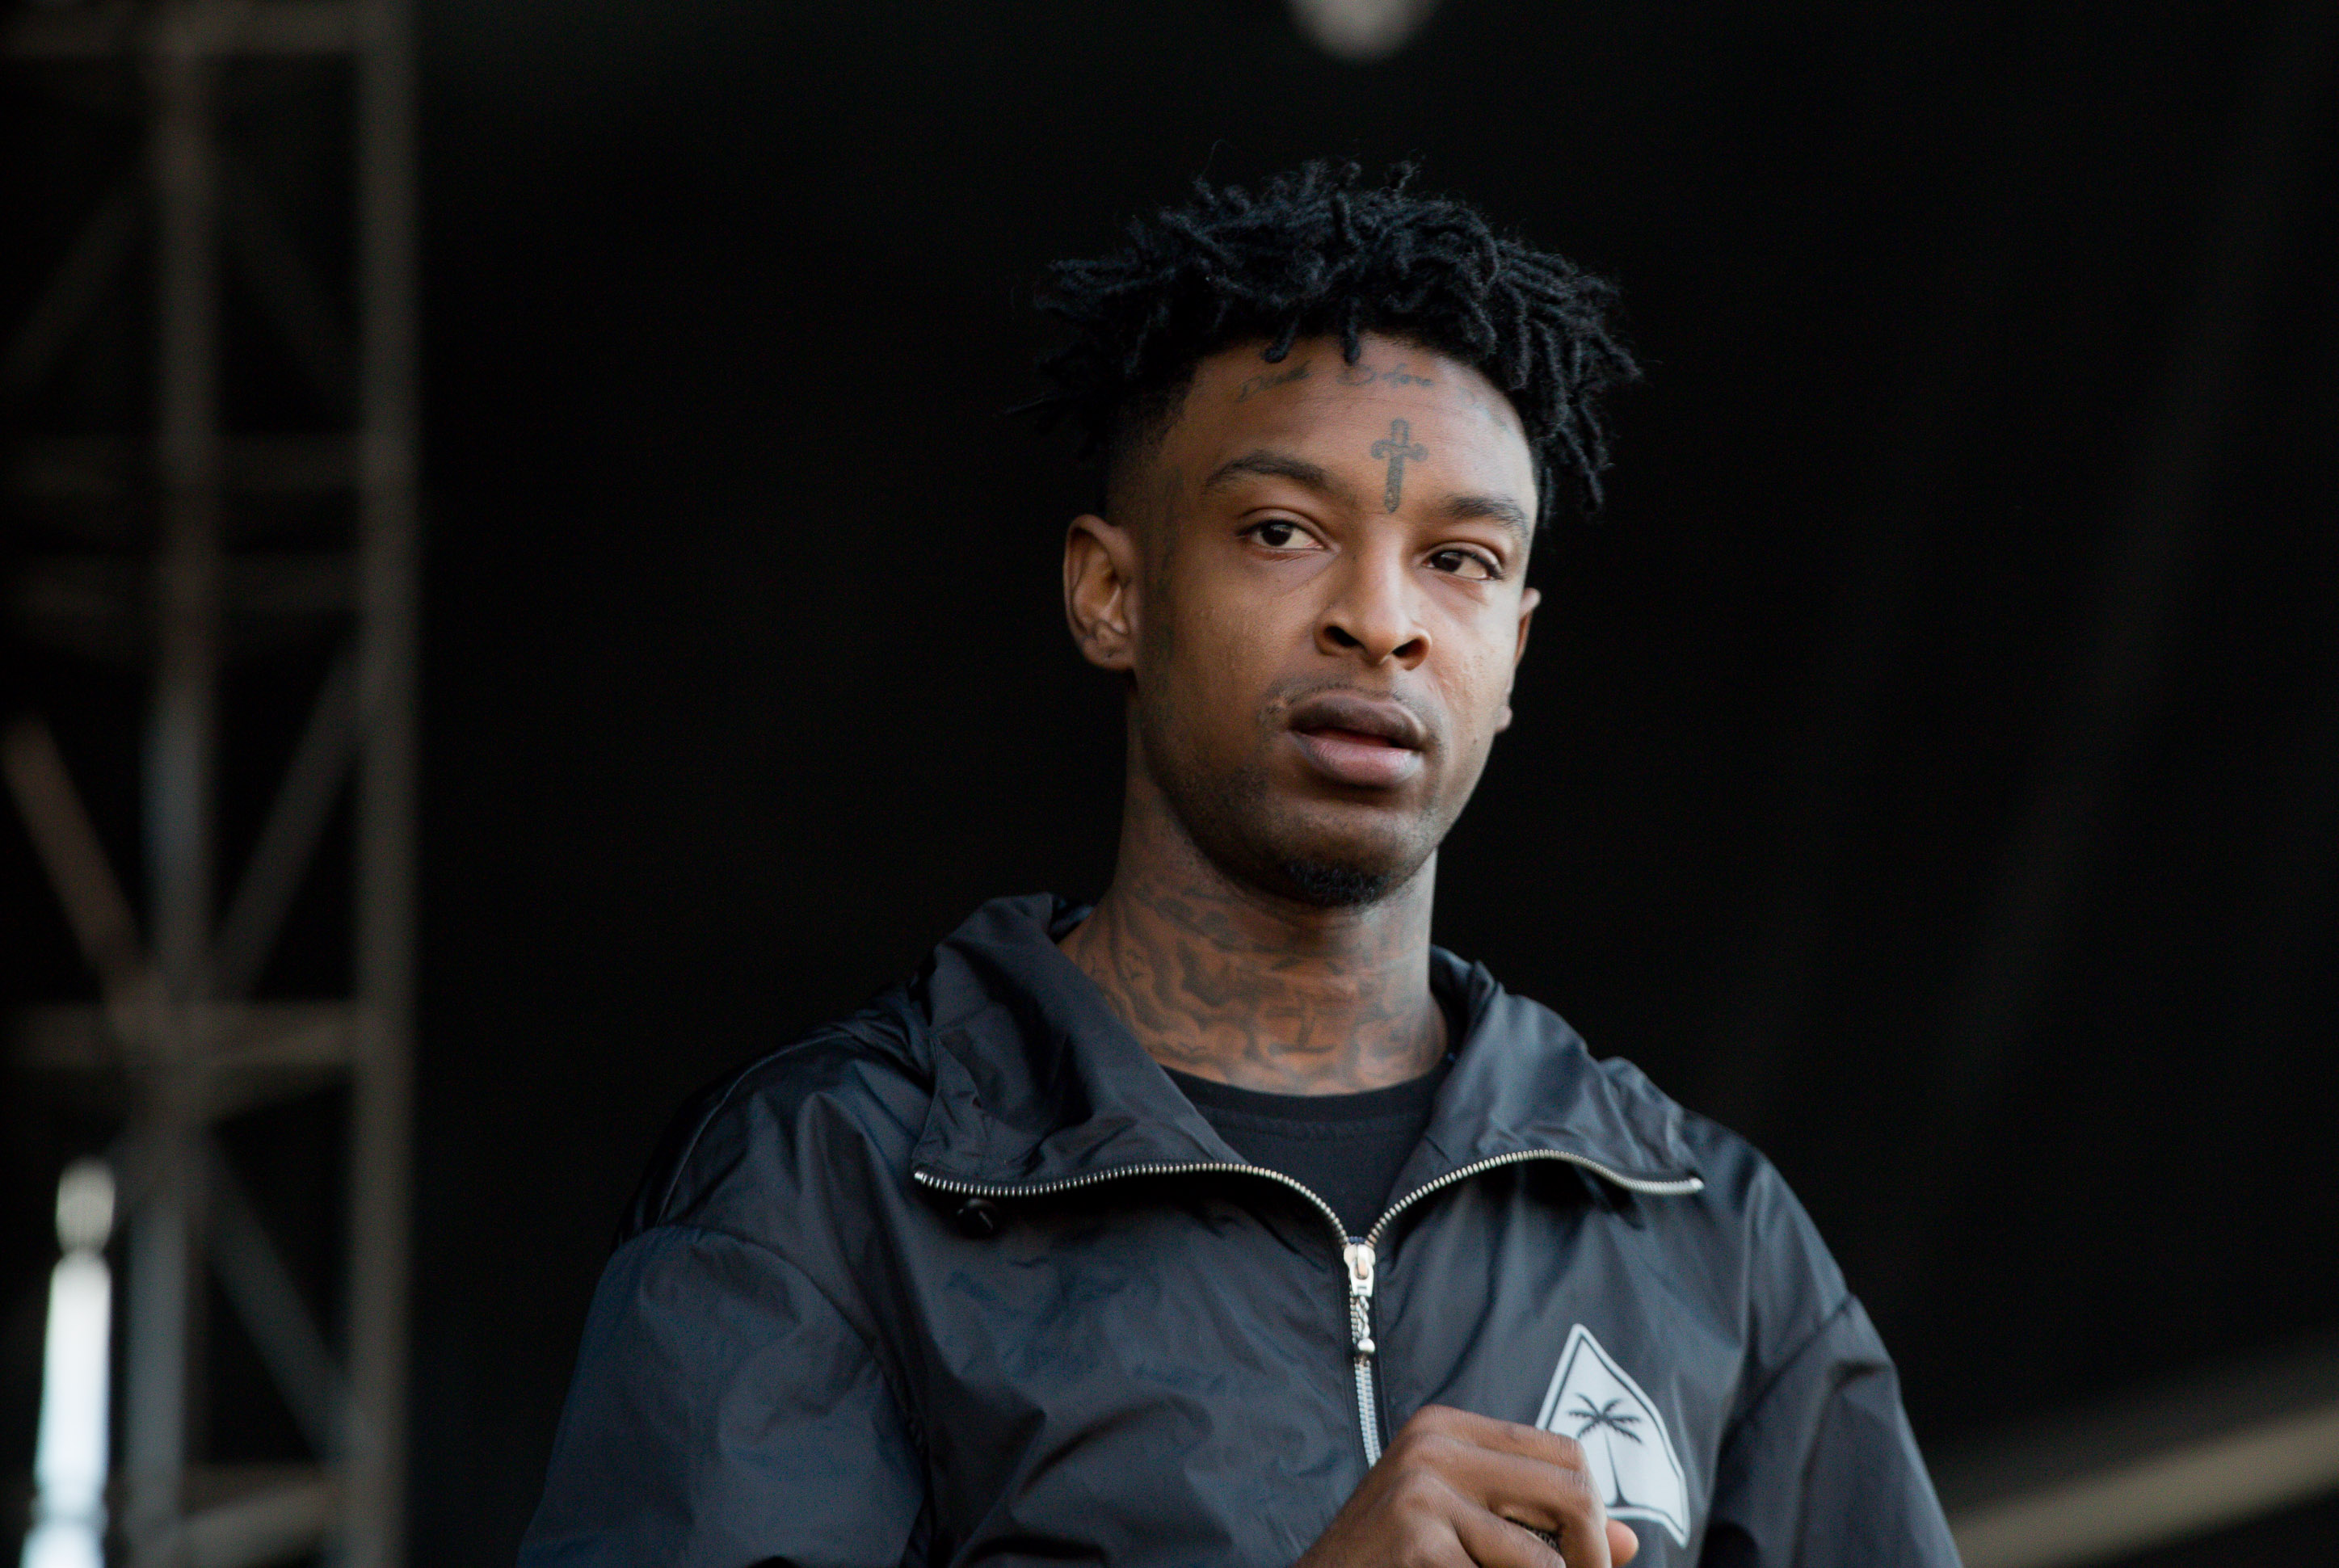 21 Savage & His Lead By Example Foundation Buy Gifts For Atlanta Kids